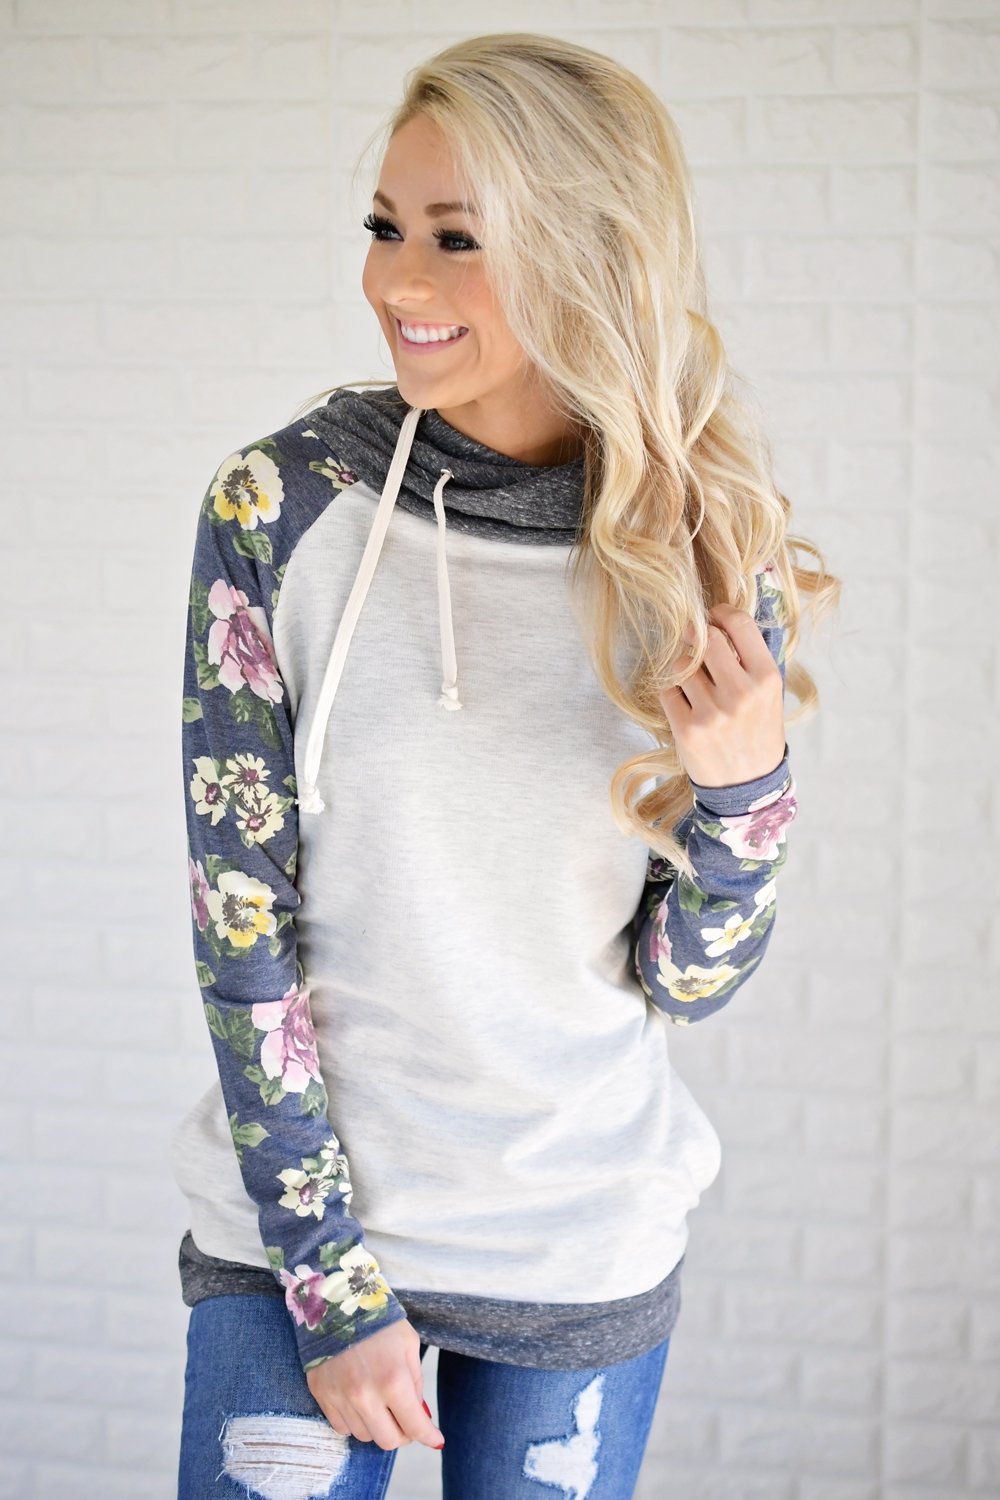 Little Patch of Heaven Hoodie – The Pulse Boutique